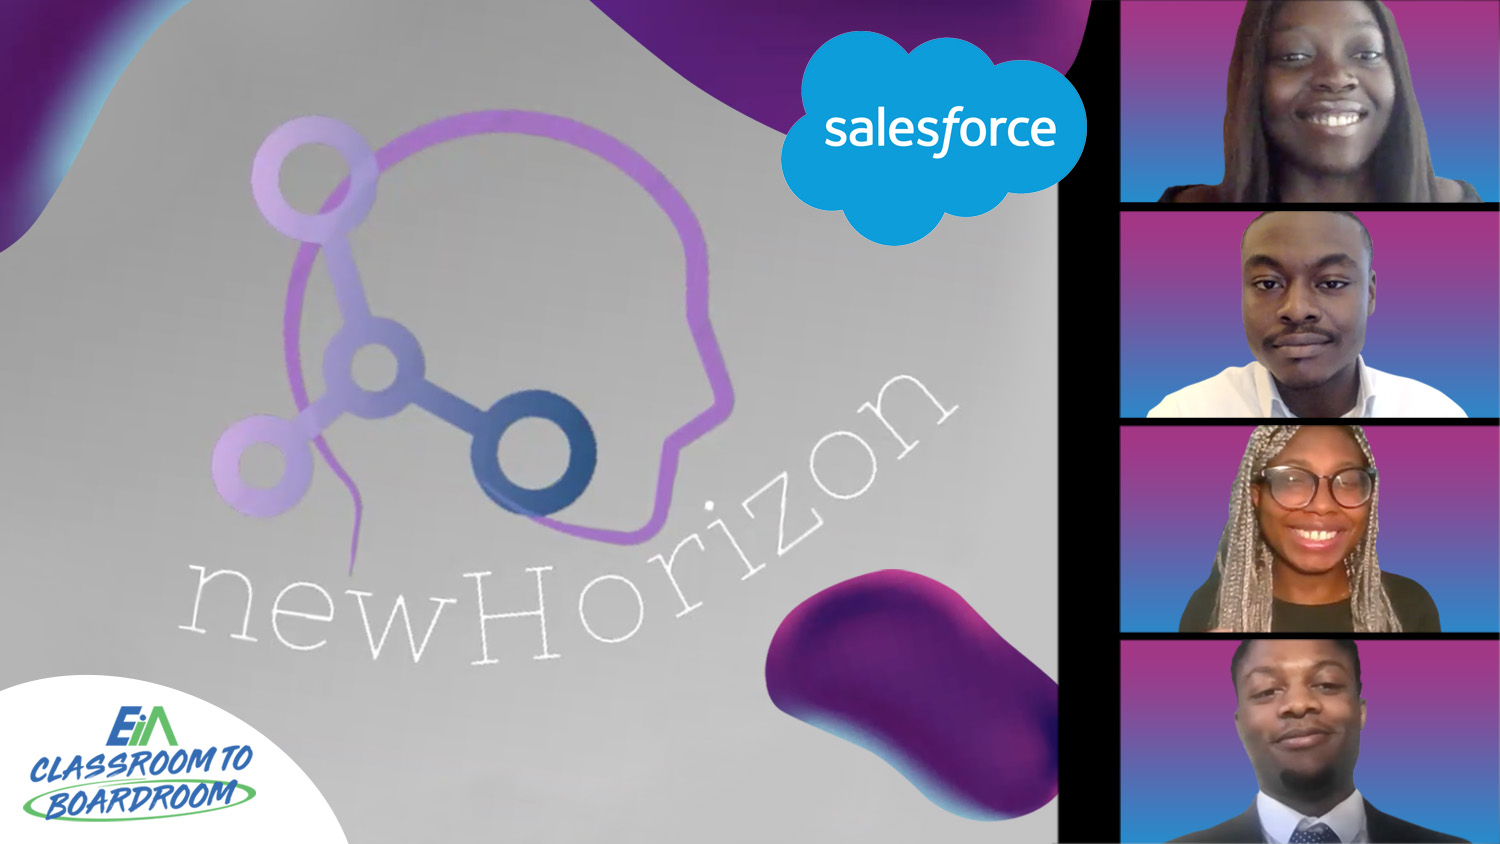 From Classroom to Boardroom: Salesforce Works to Widen Access to the Tech Sector